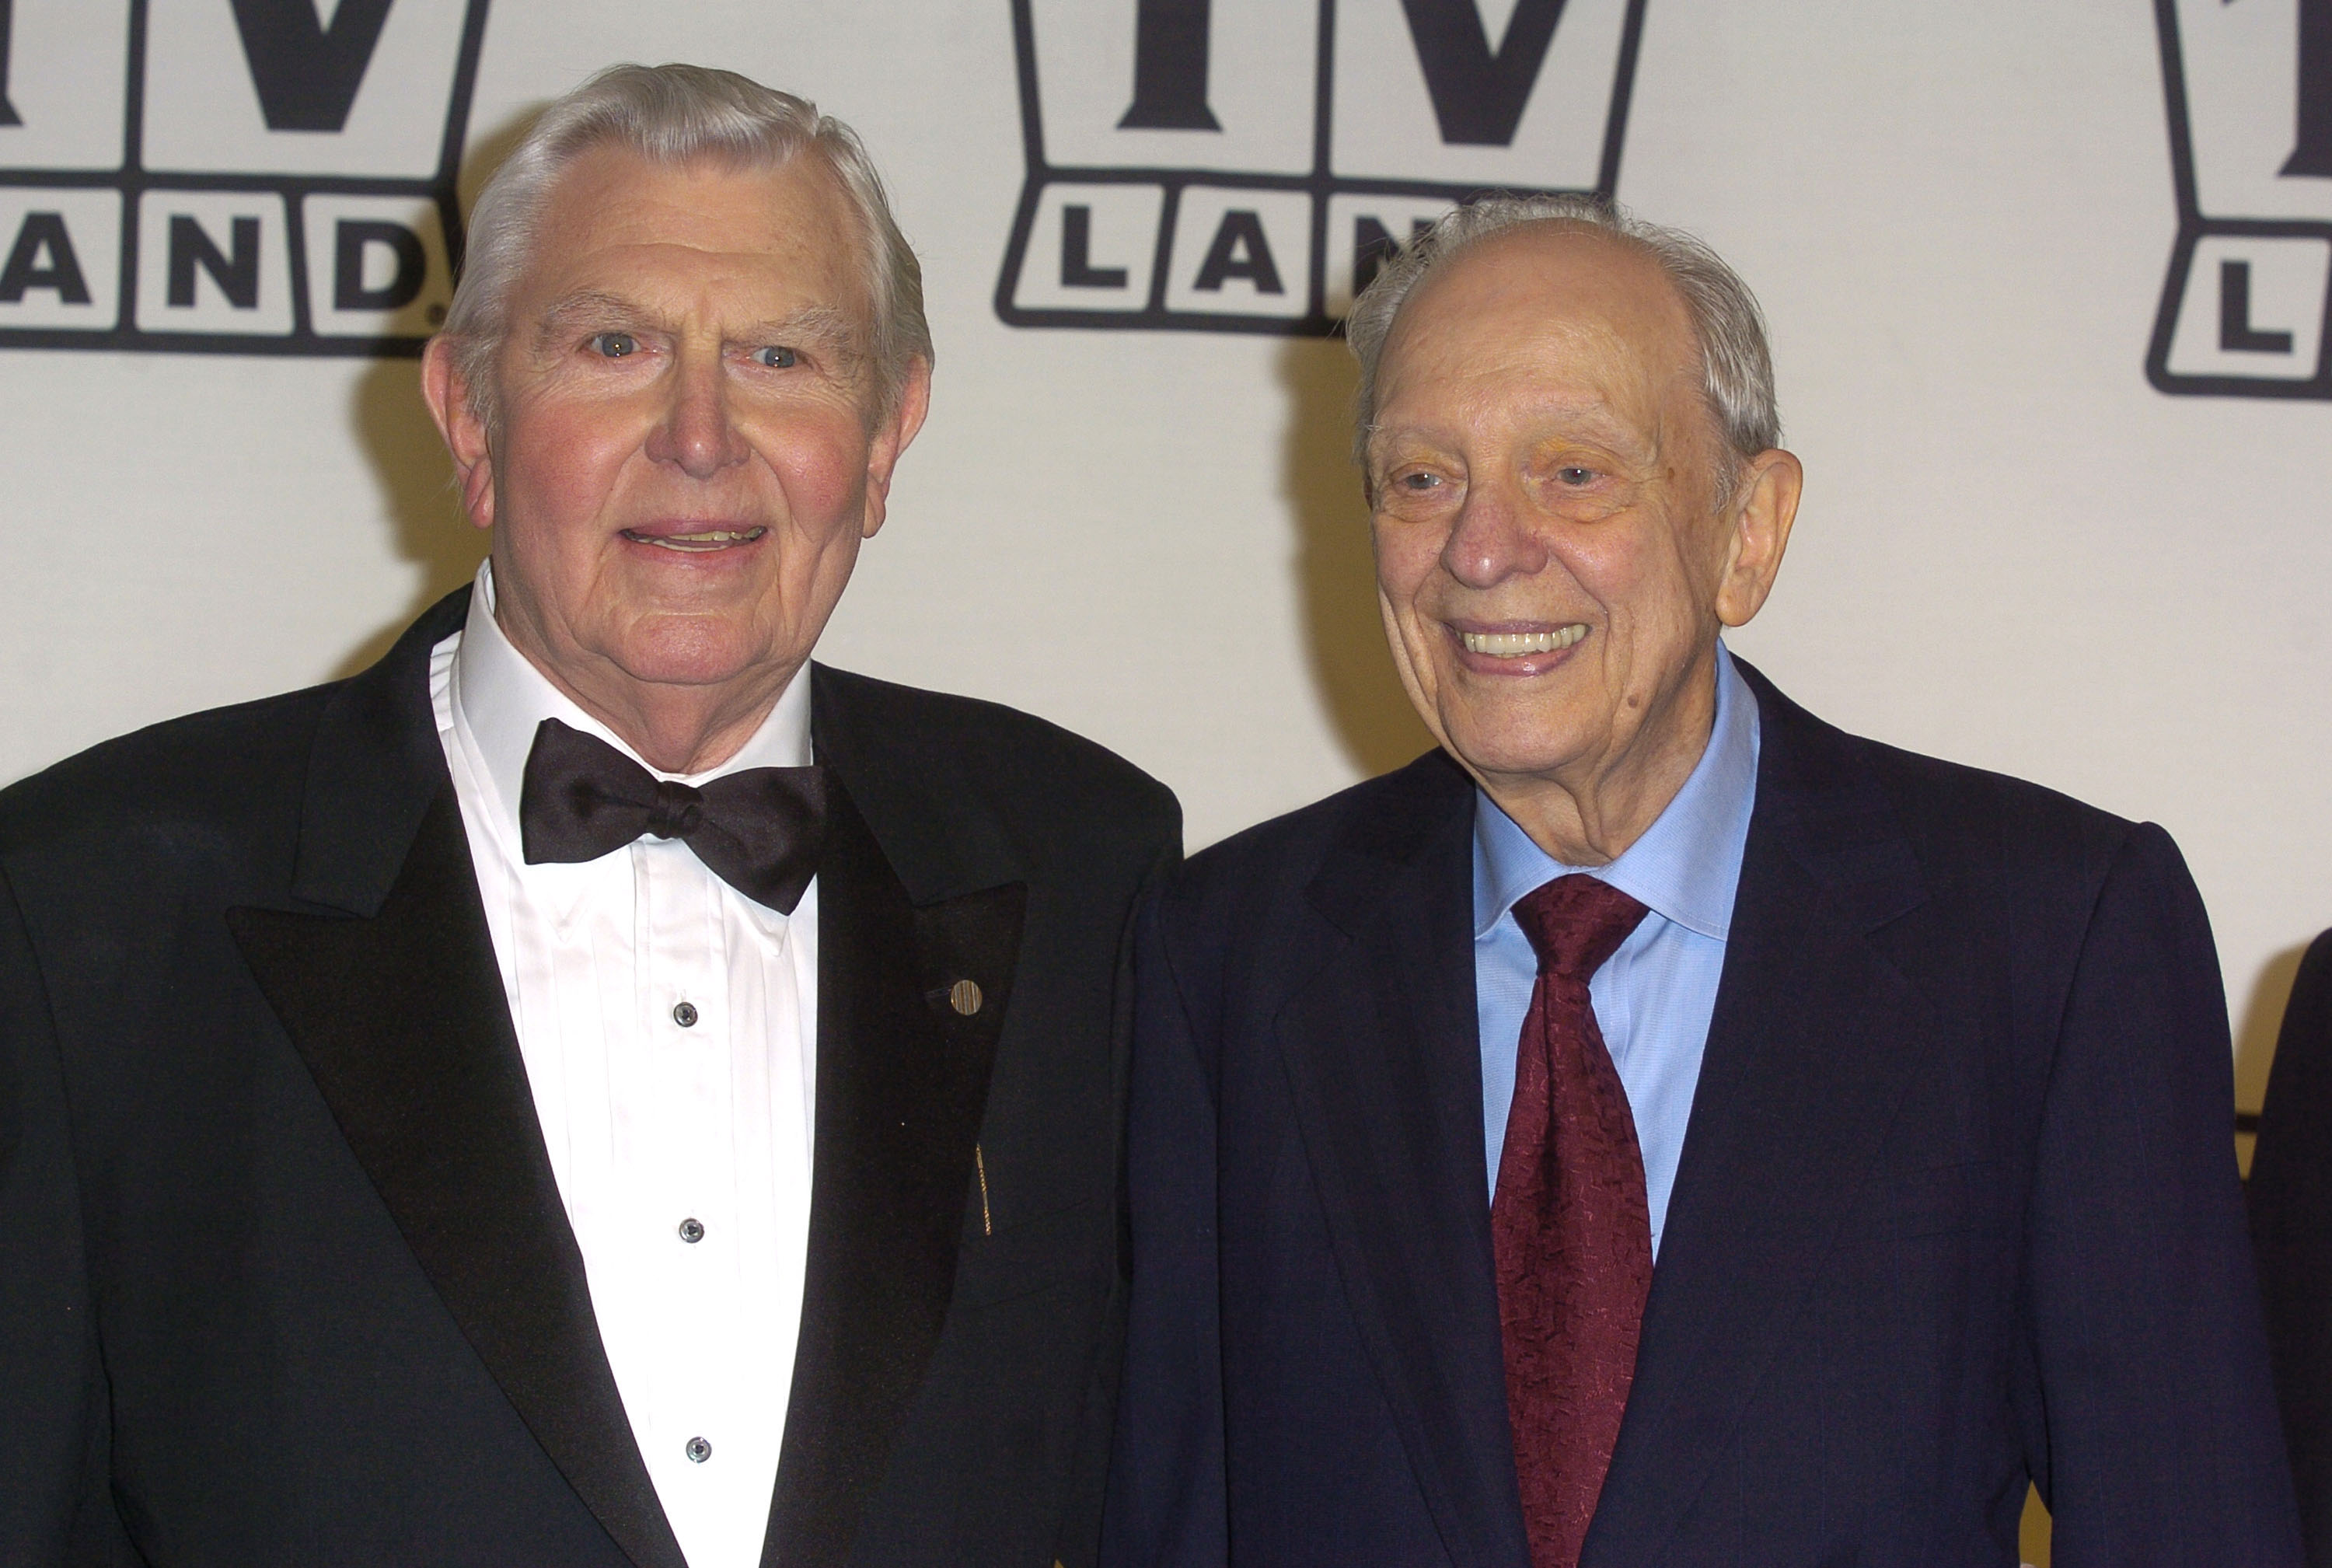 Andy Griffith, left, and Don Knotts in 2004